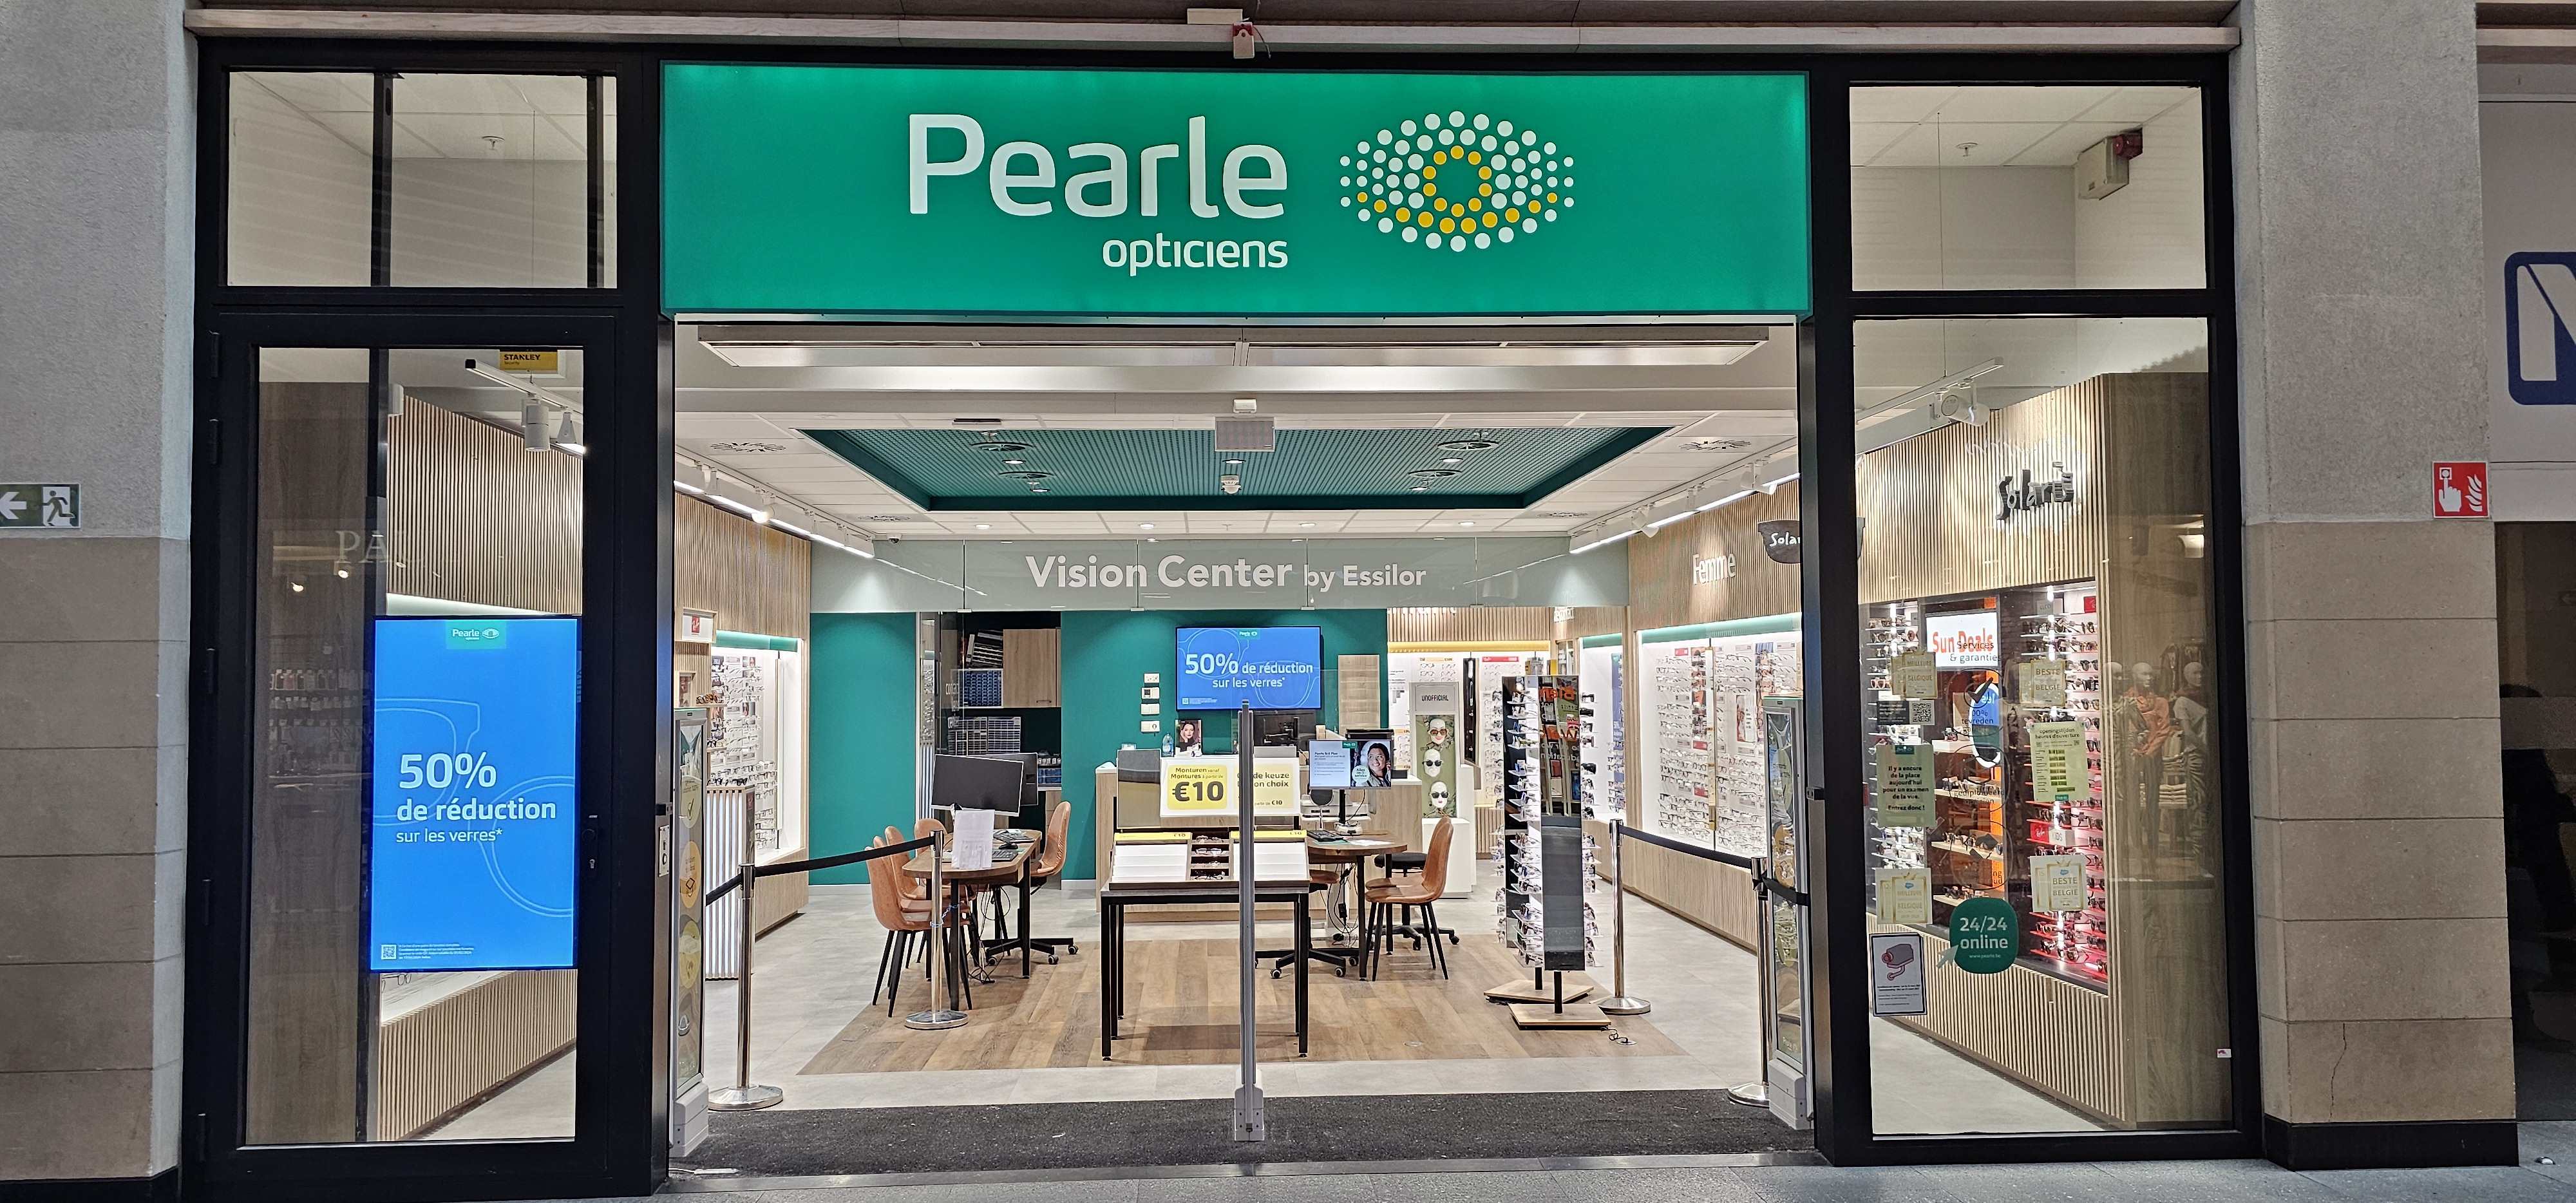 Pearle Opticiens Brussel - Galerie Anspach